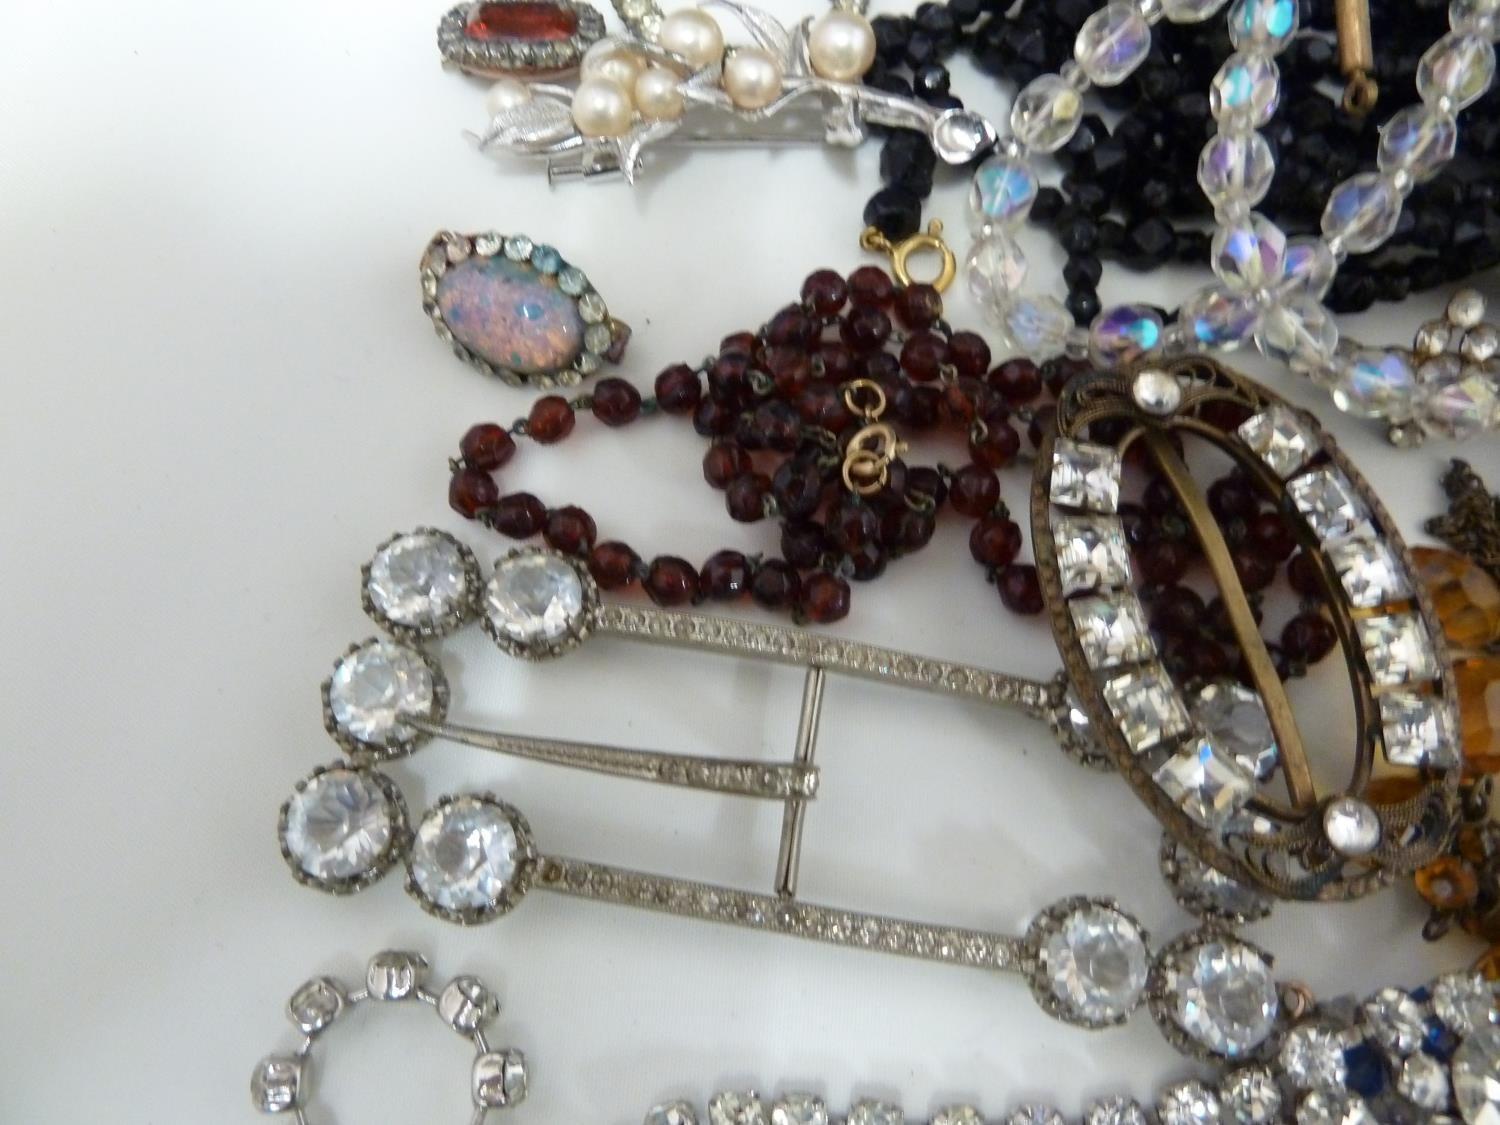 Vintage costume jewellery - varius items of diamante and old paste set items, including a - Image 4 of 9